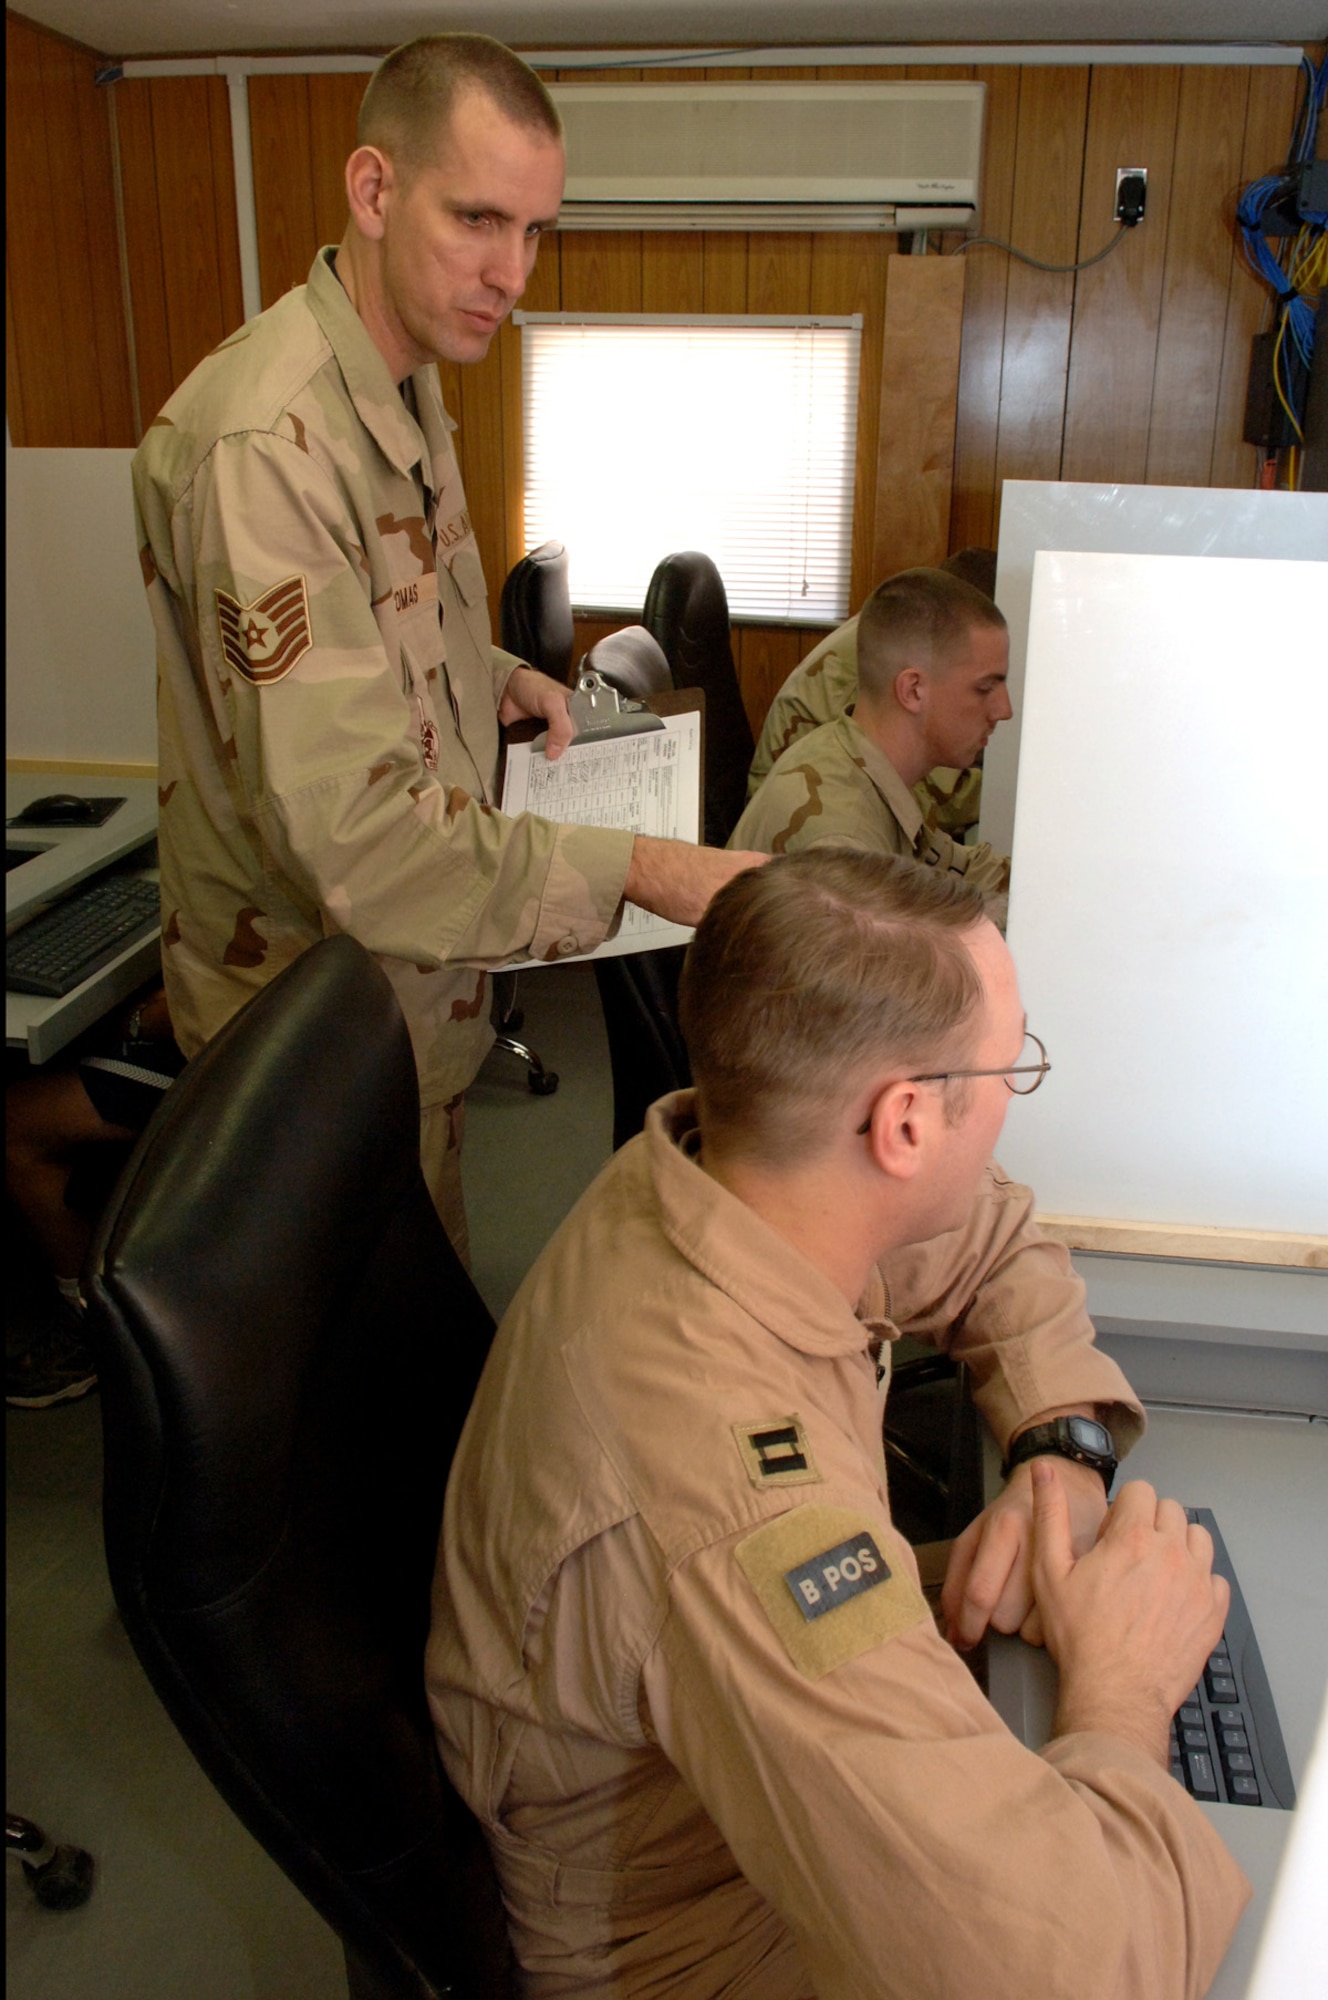 Tech. Sgt. Jack Thomas prepares 332nd Air Expeditionary Wing Airmen for a computer-based test at Balad Air Base, Iraq. He is the 332nd Expeditionary Services Squadron's test control officer. (U. S. Air Force photo/Staff Sgt. Michael R. Holzworth)